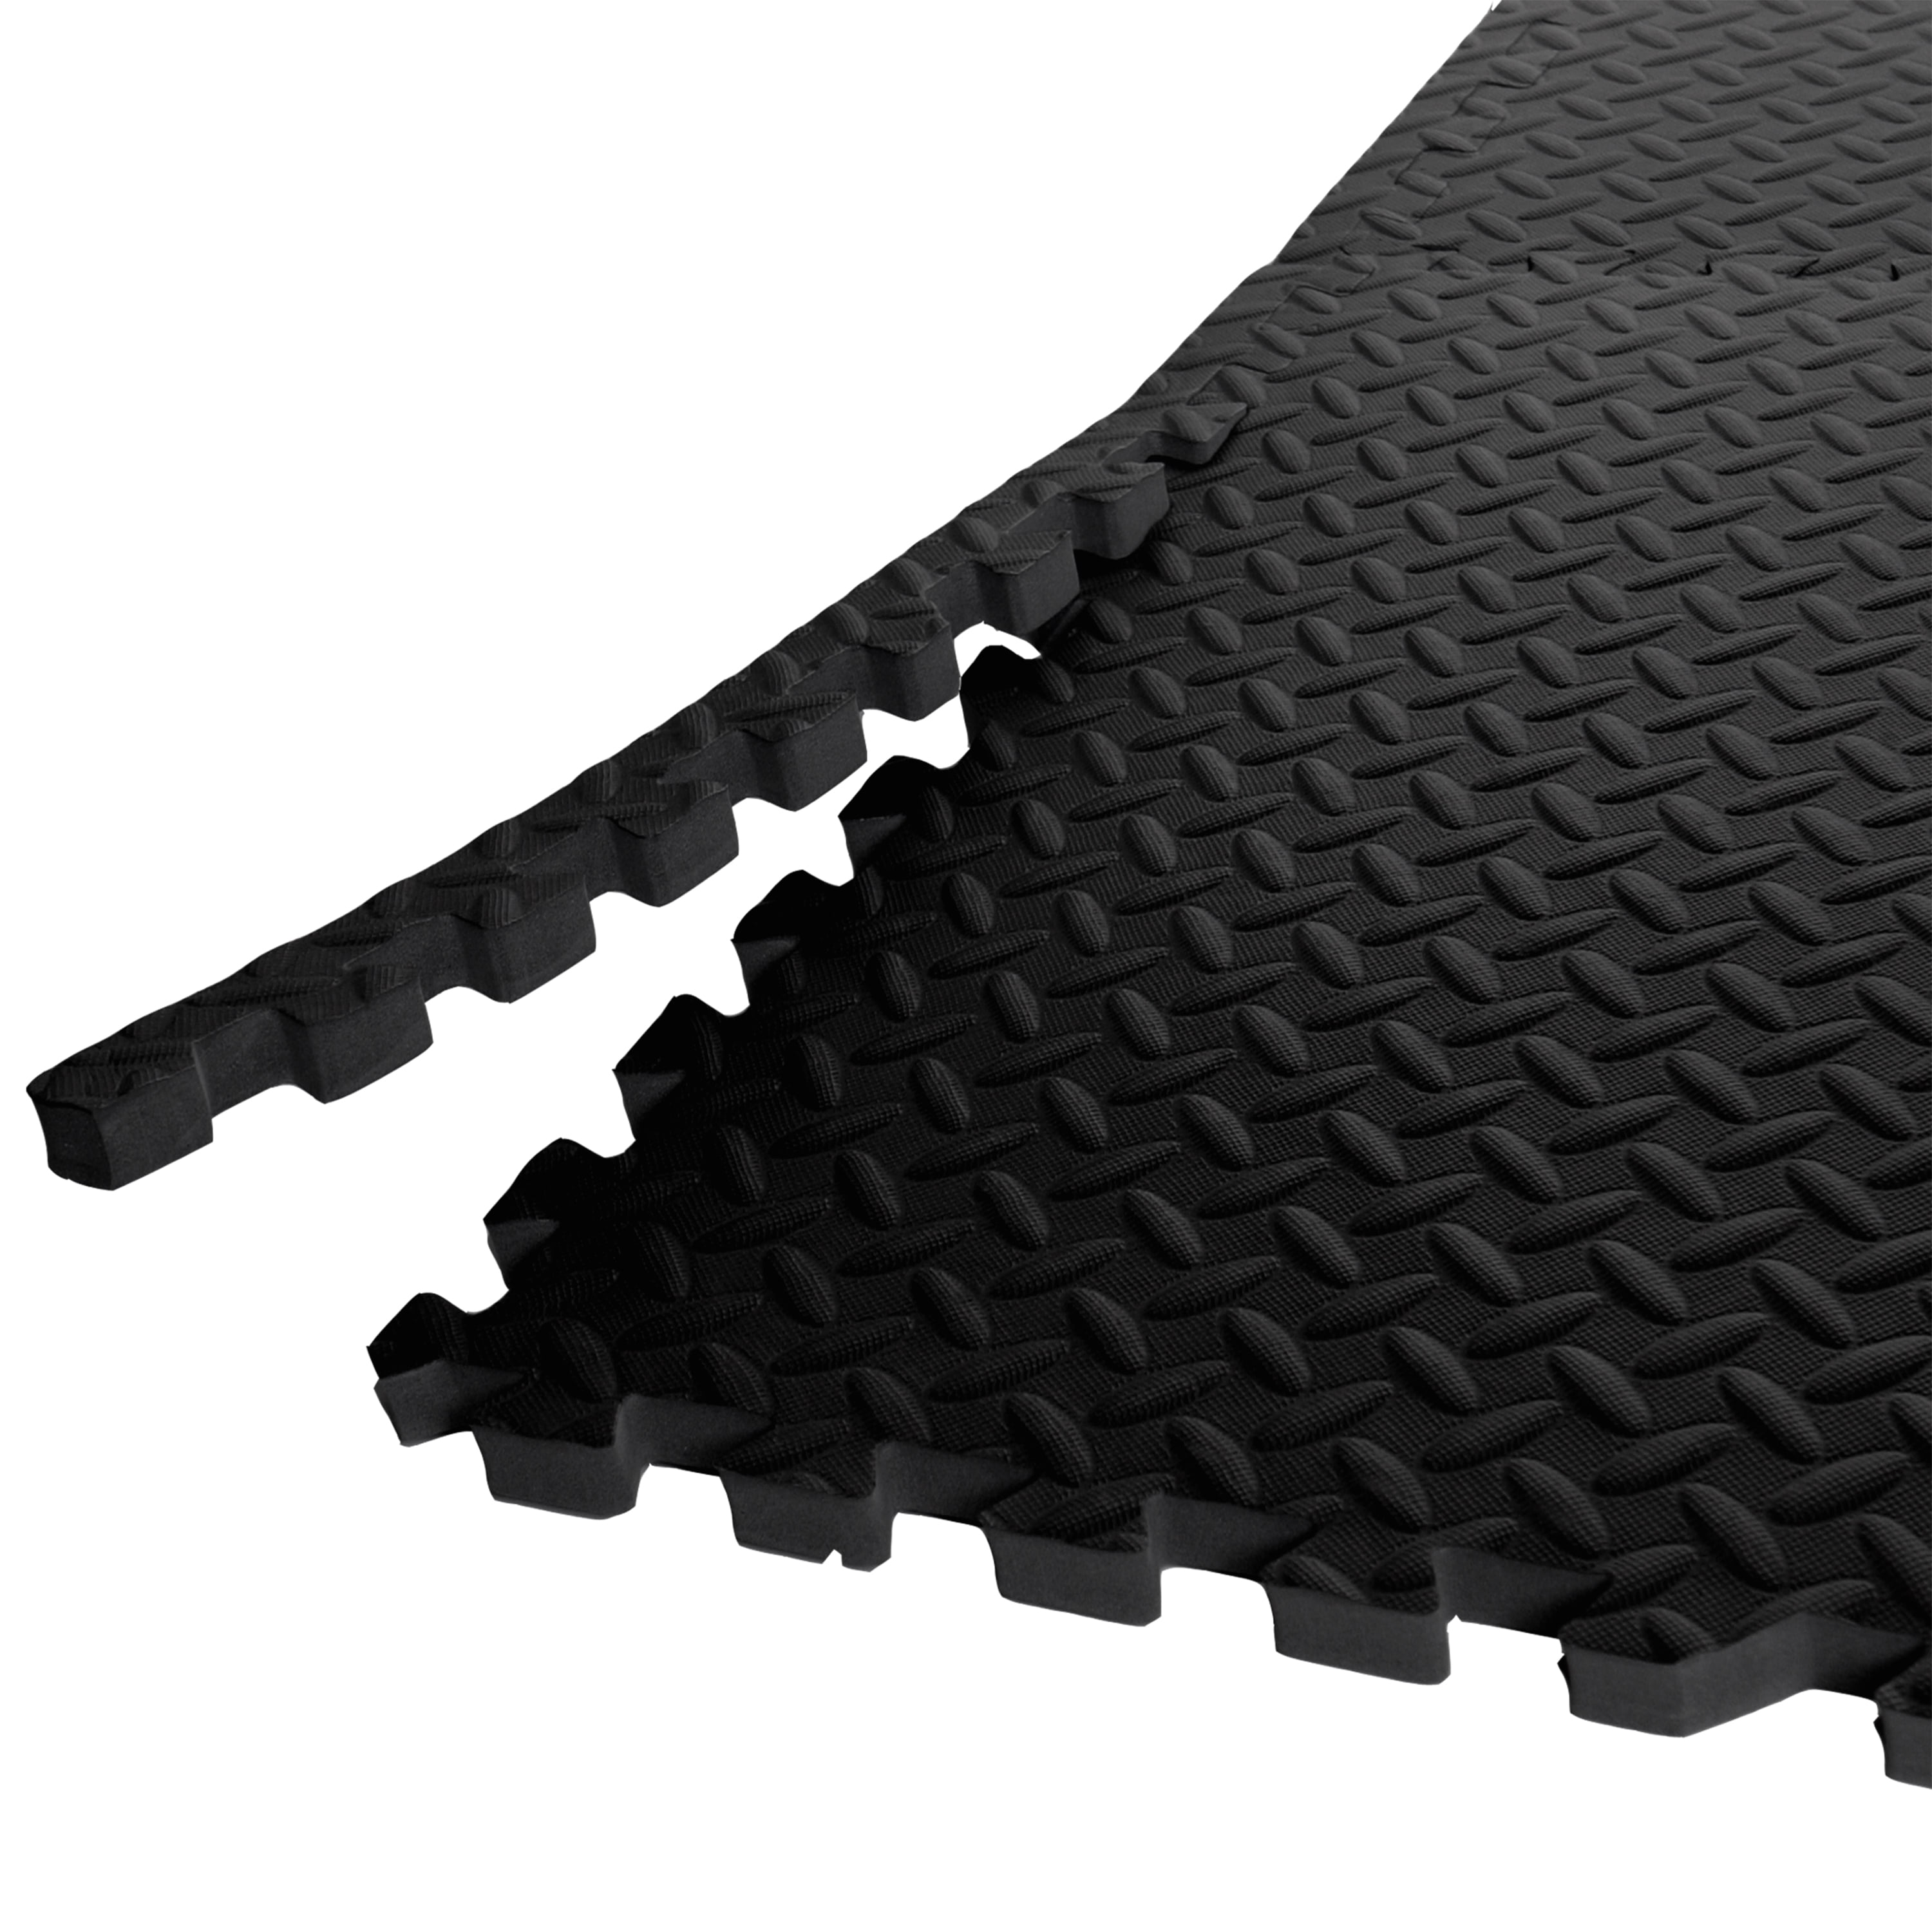 CAP Puzzle Exercise Mat Black 24 in. x 24 in. x 0.5 in. EVA Foam  Interlocking Tiles with Border (48 sq. ft.) MTS2-1206AM - The Home Depot